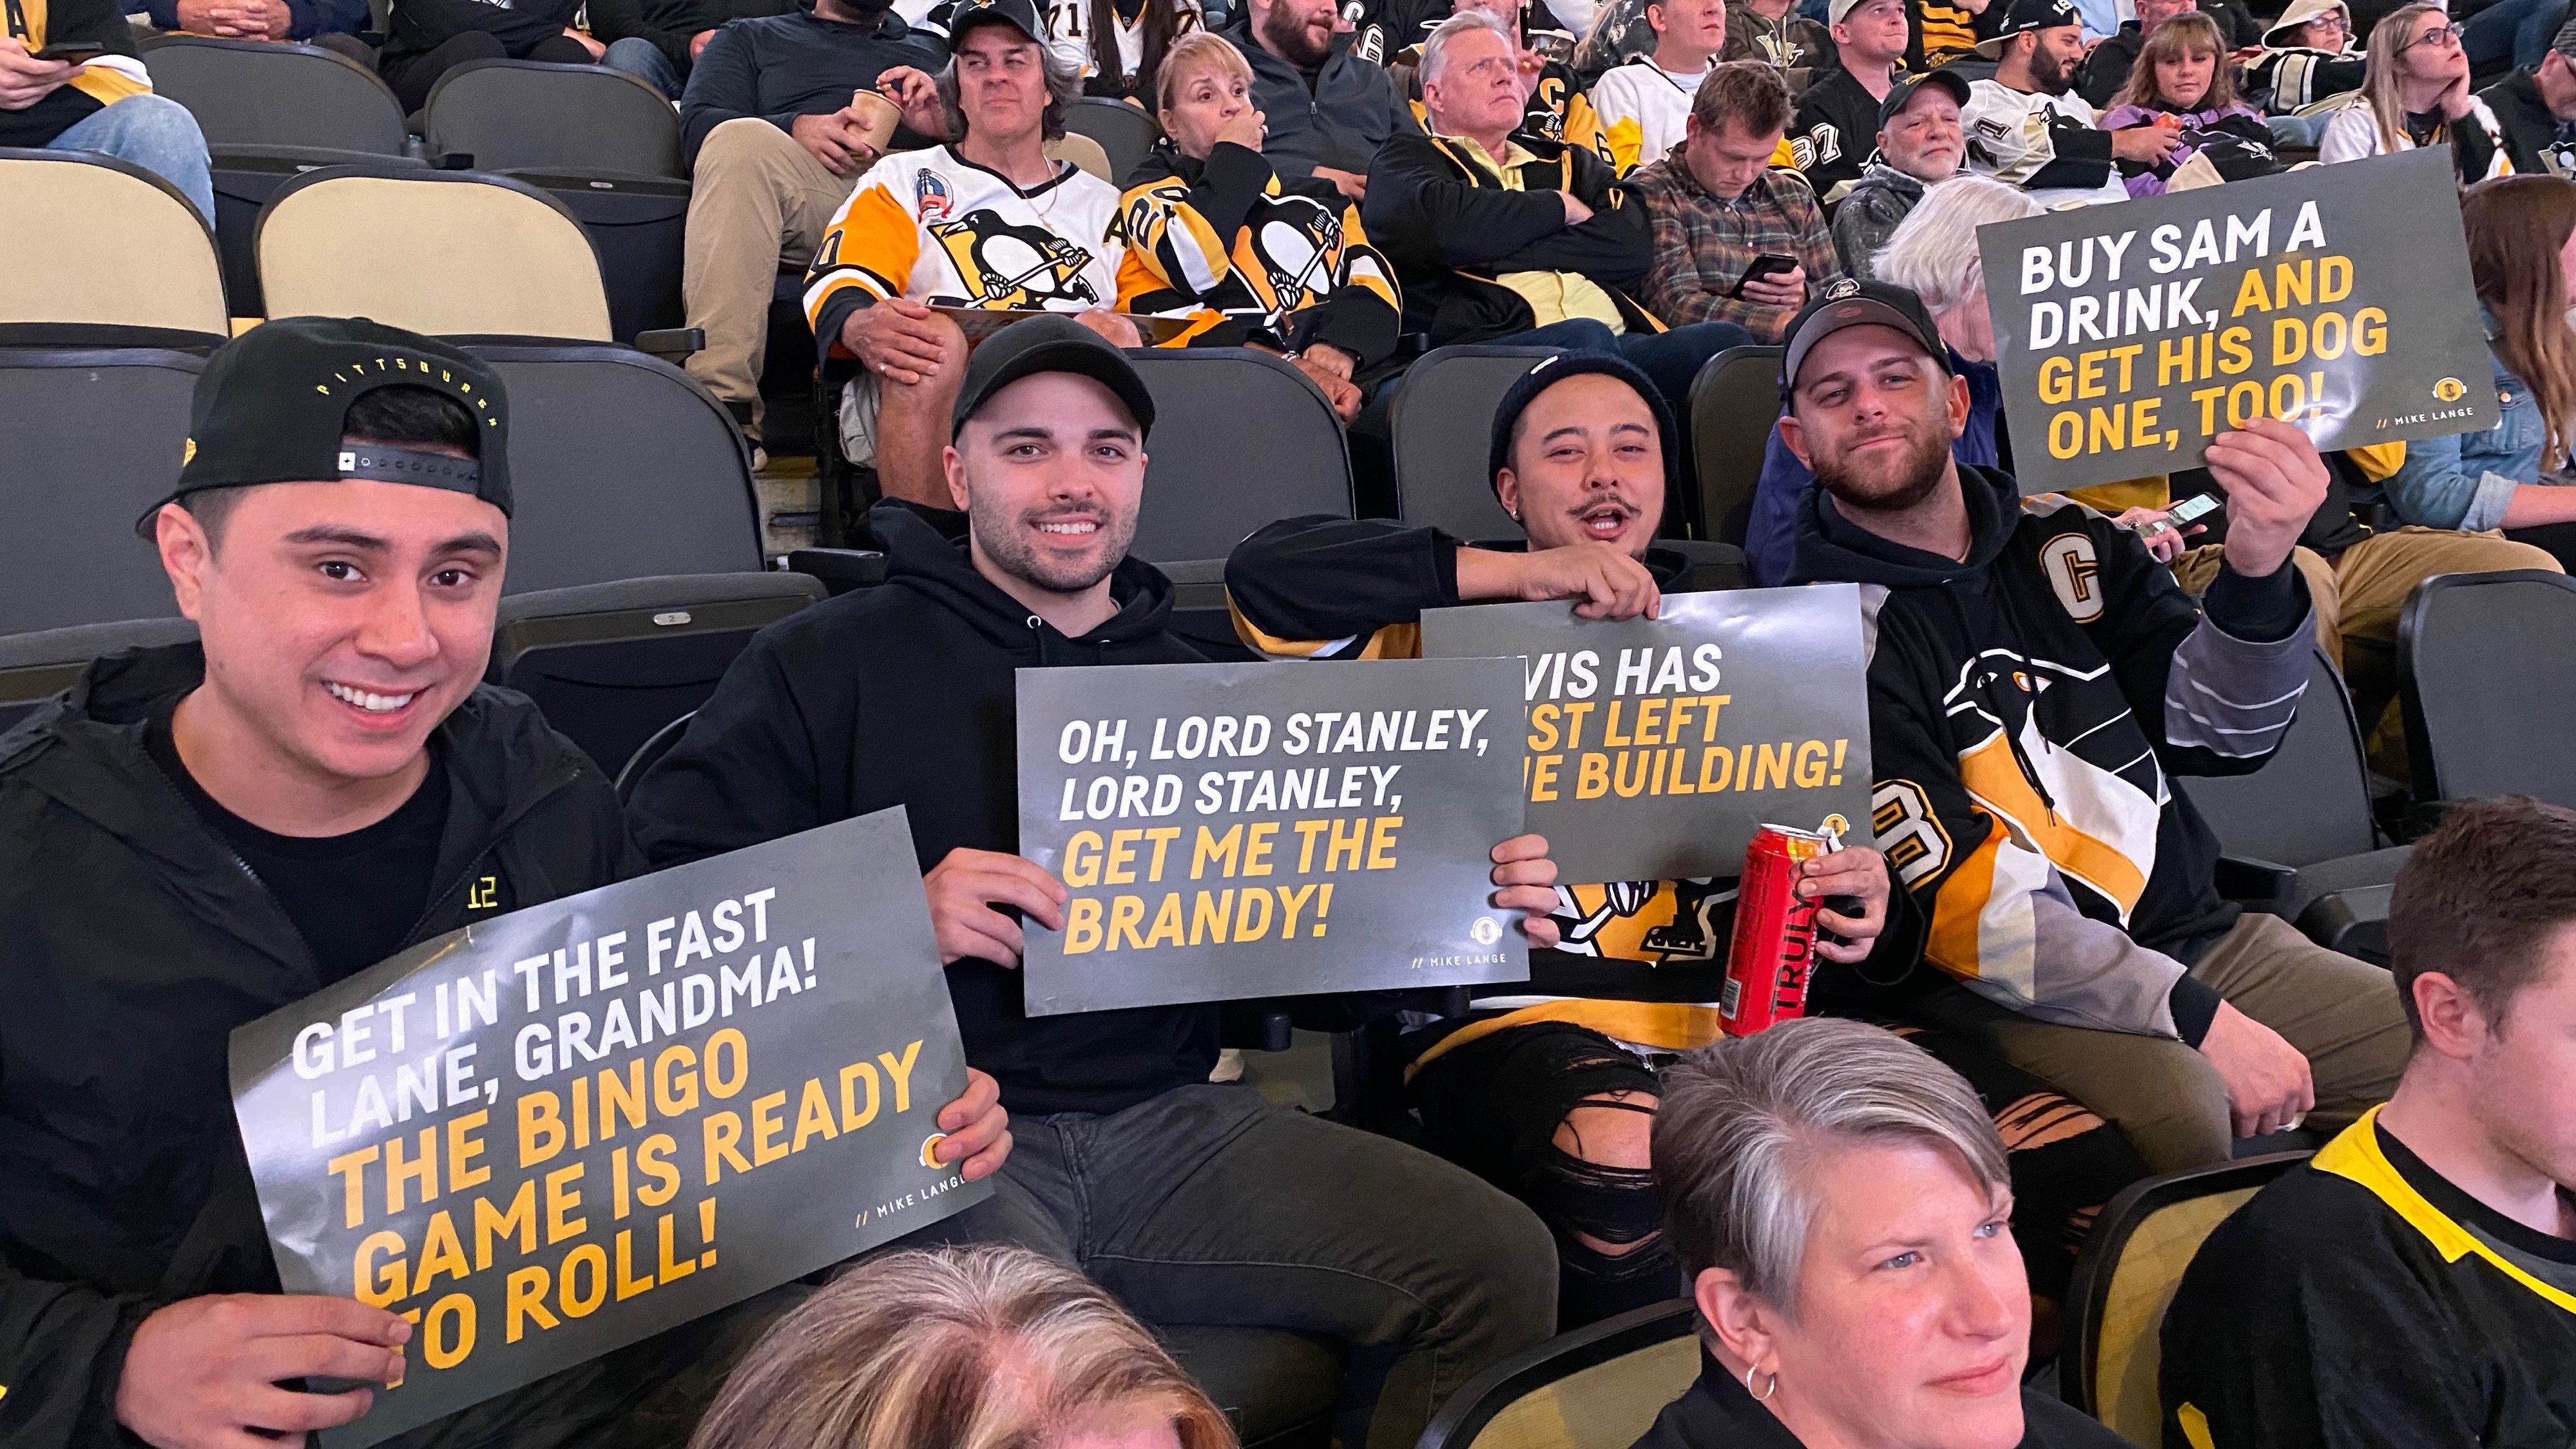 Kostbar Hvilken en Valg Pittsburgh Penguins on X: "Get in the fast lane, Grandma! The bingo game is  ready to roll into overtime! https://t.co/nA3BNoaIpZ" / X